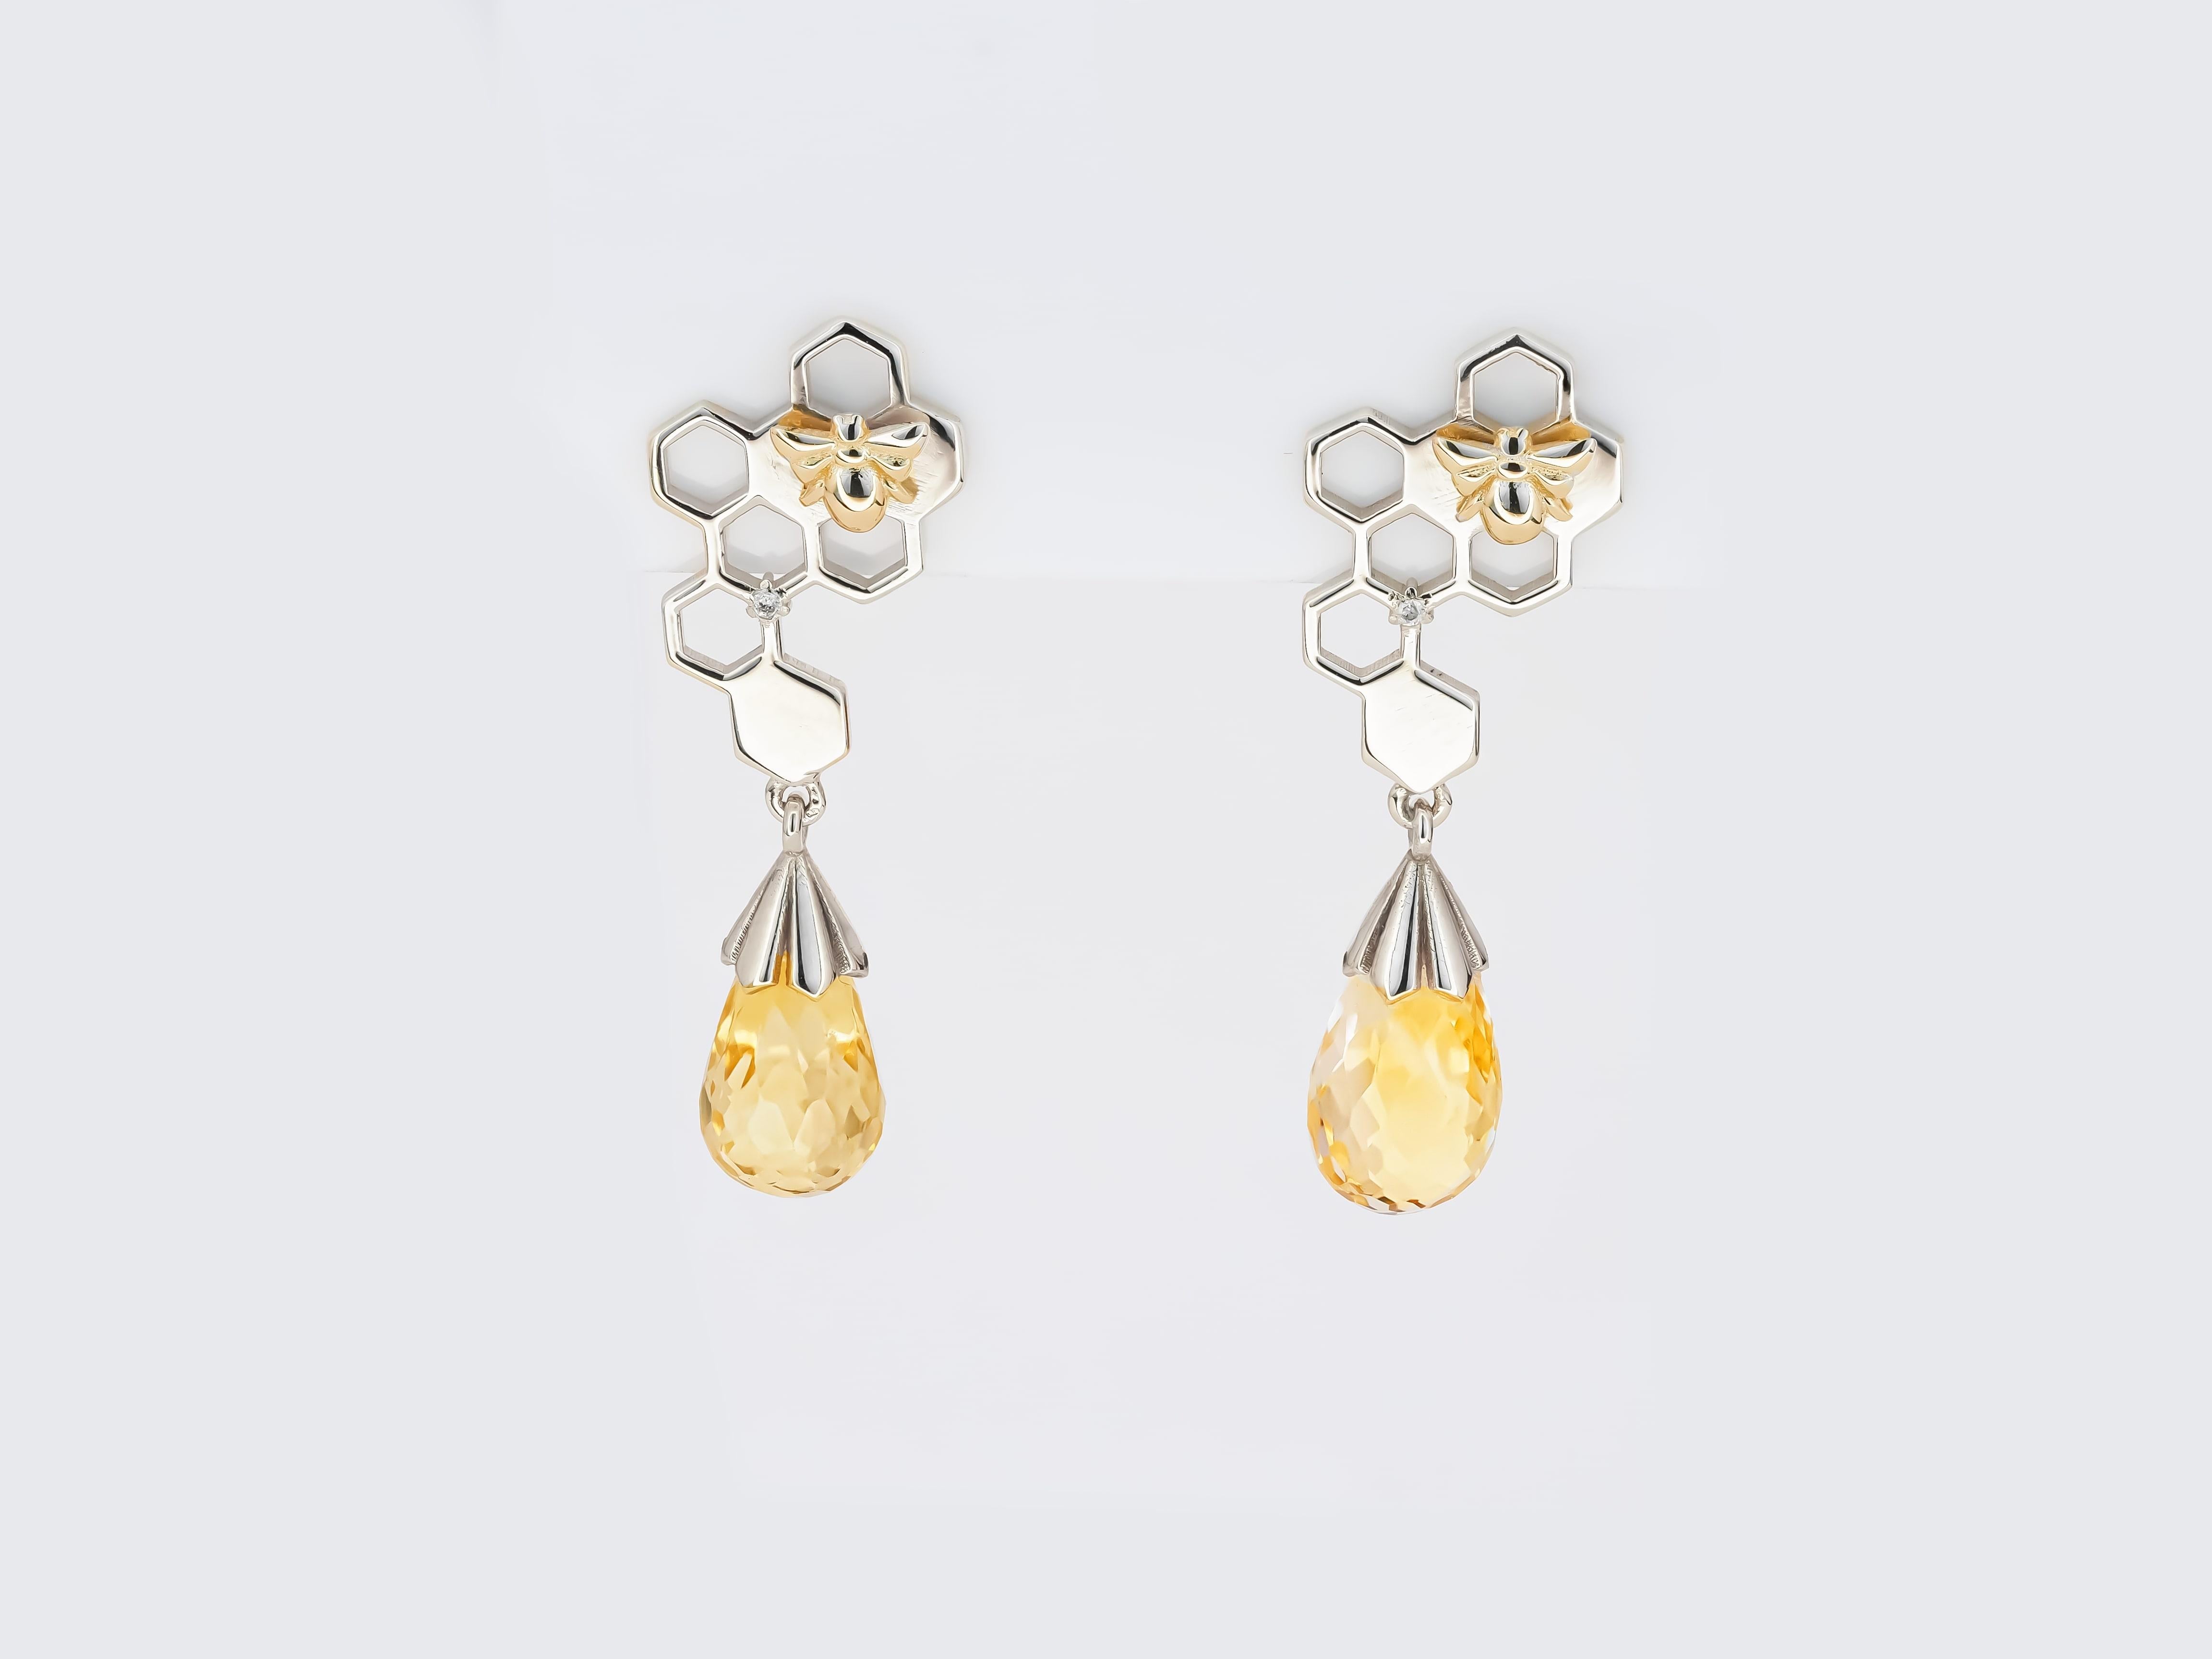 Briolette Cut Bee on Honeycomb 14k Gold Studs Earrings with with Citrines Briolettes